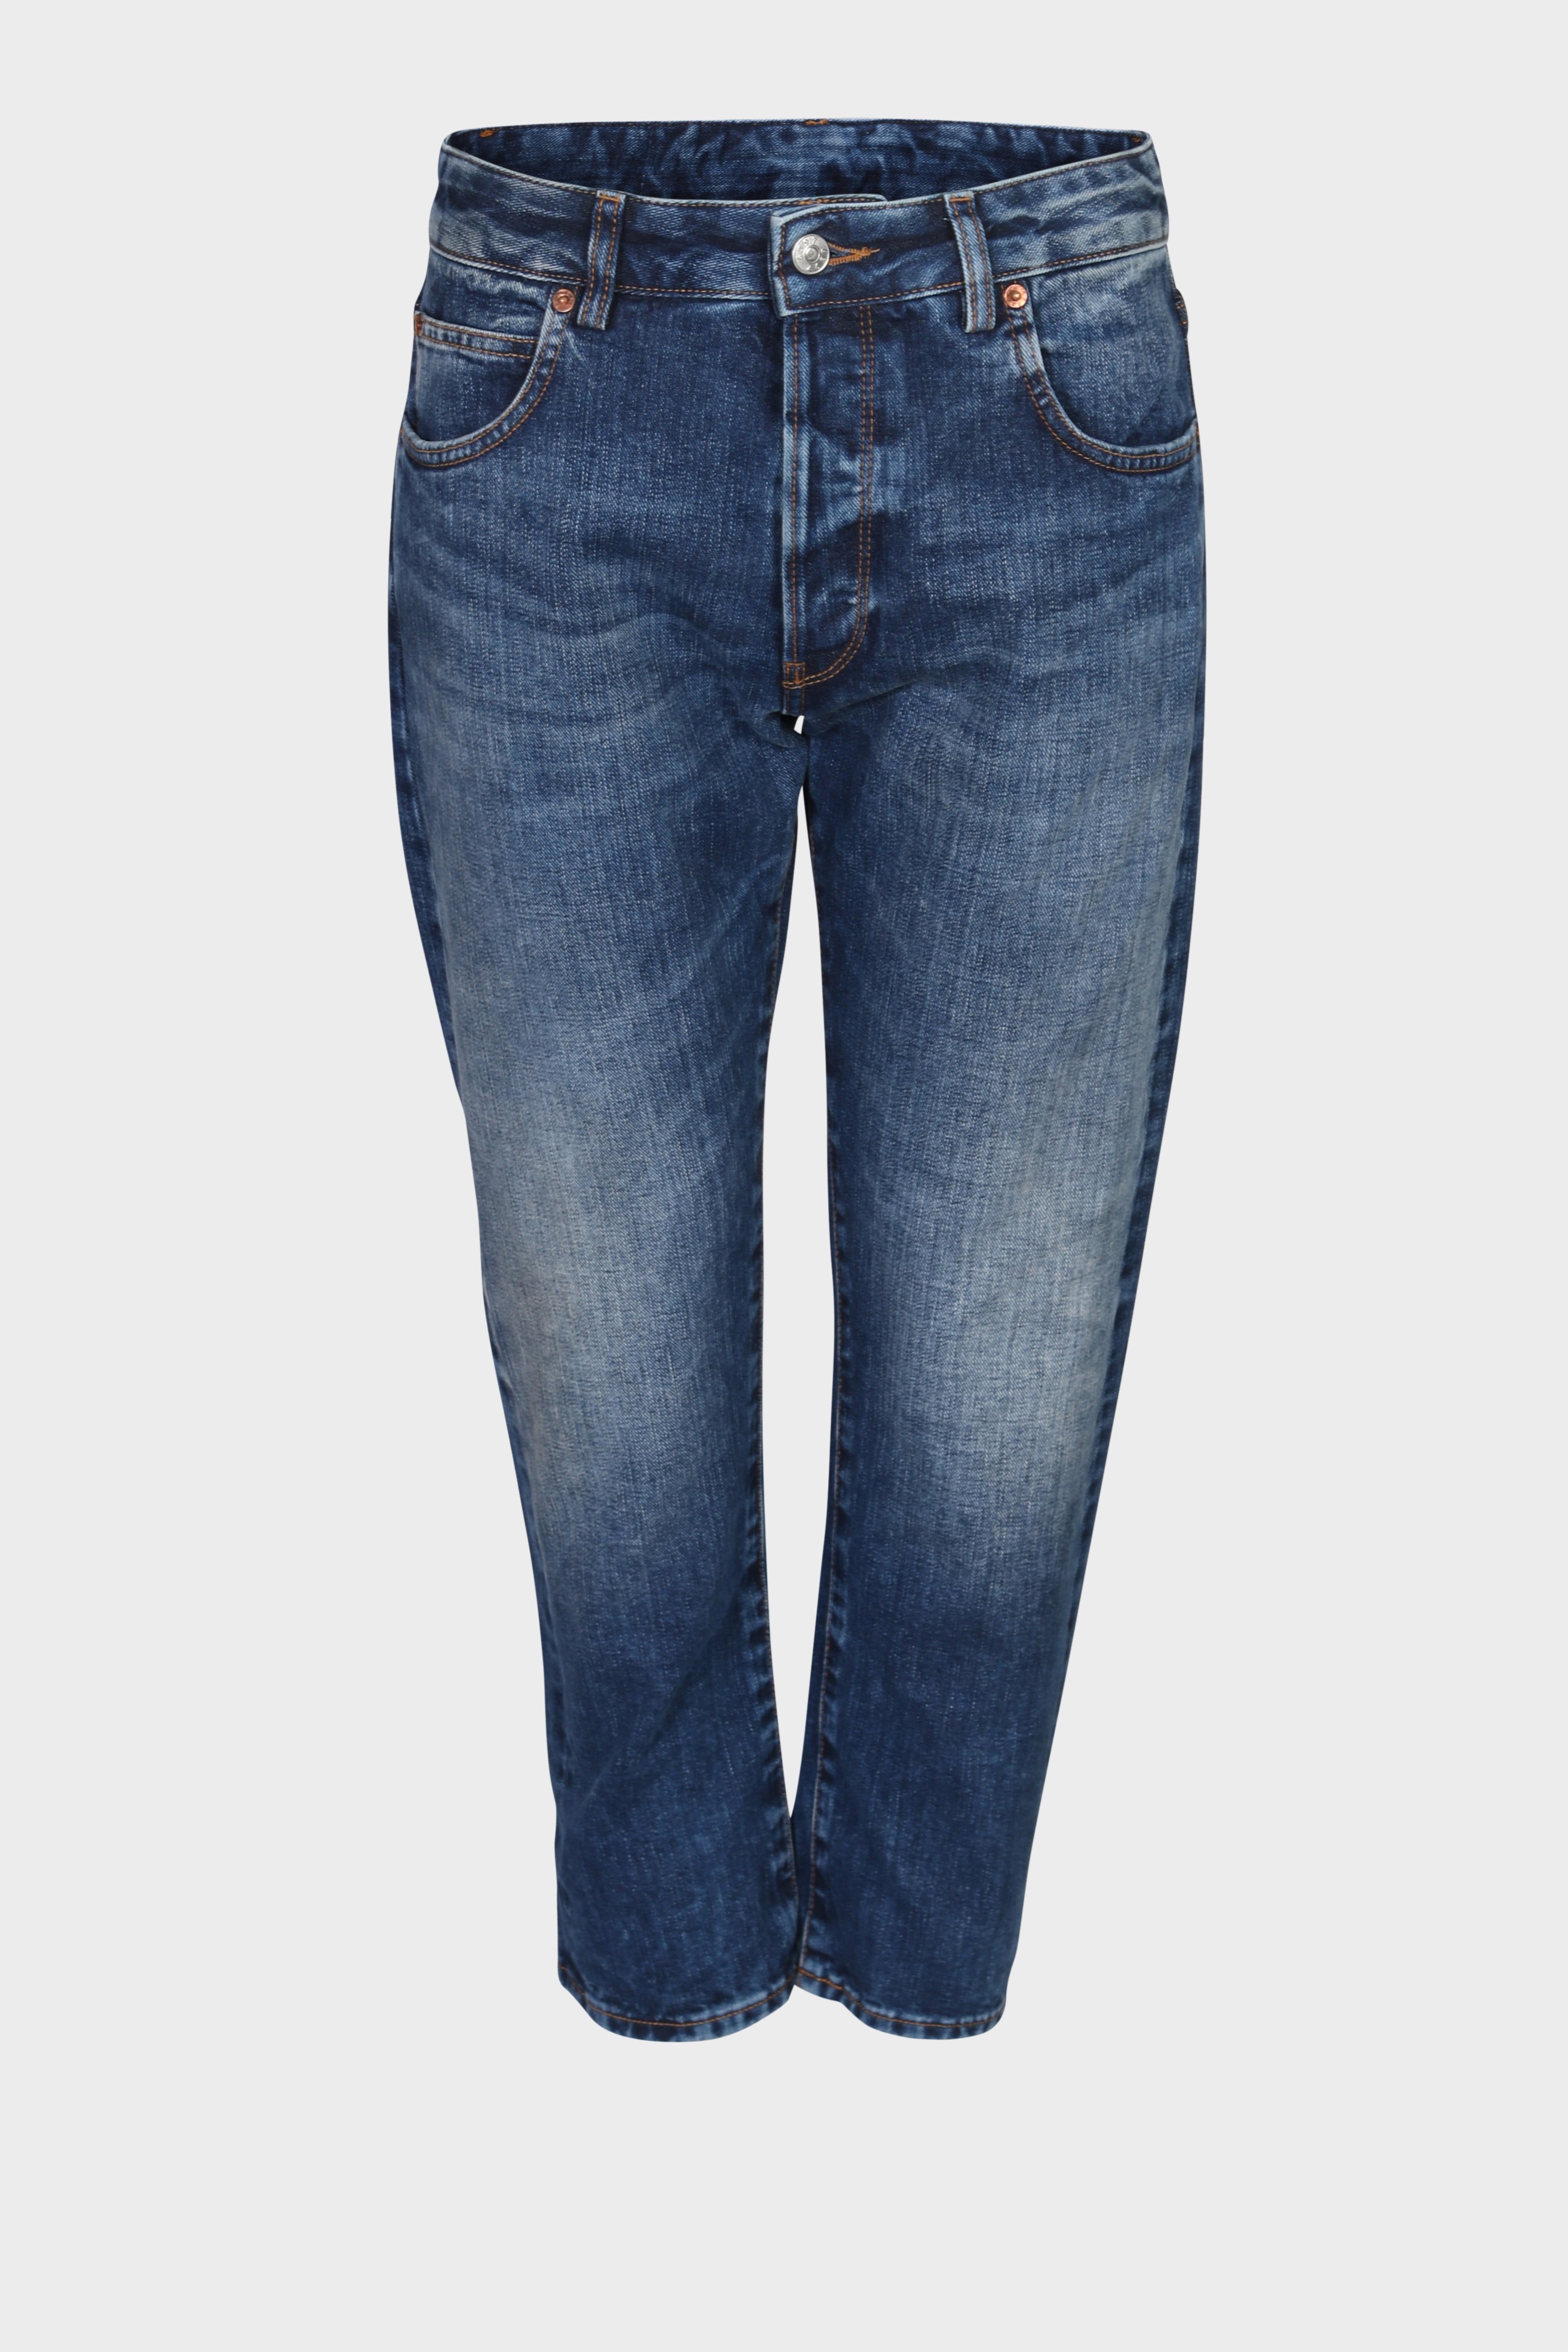 6397 Shorty Jeans in Hi-Contrast Blue 28